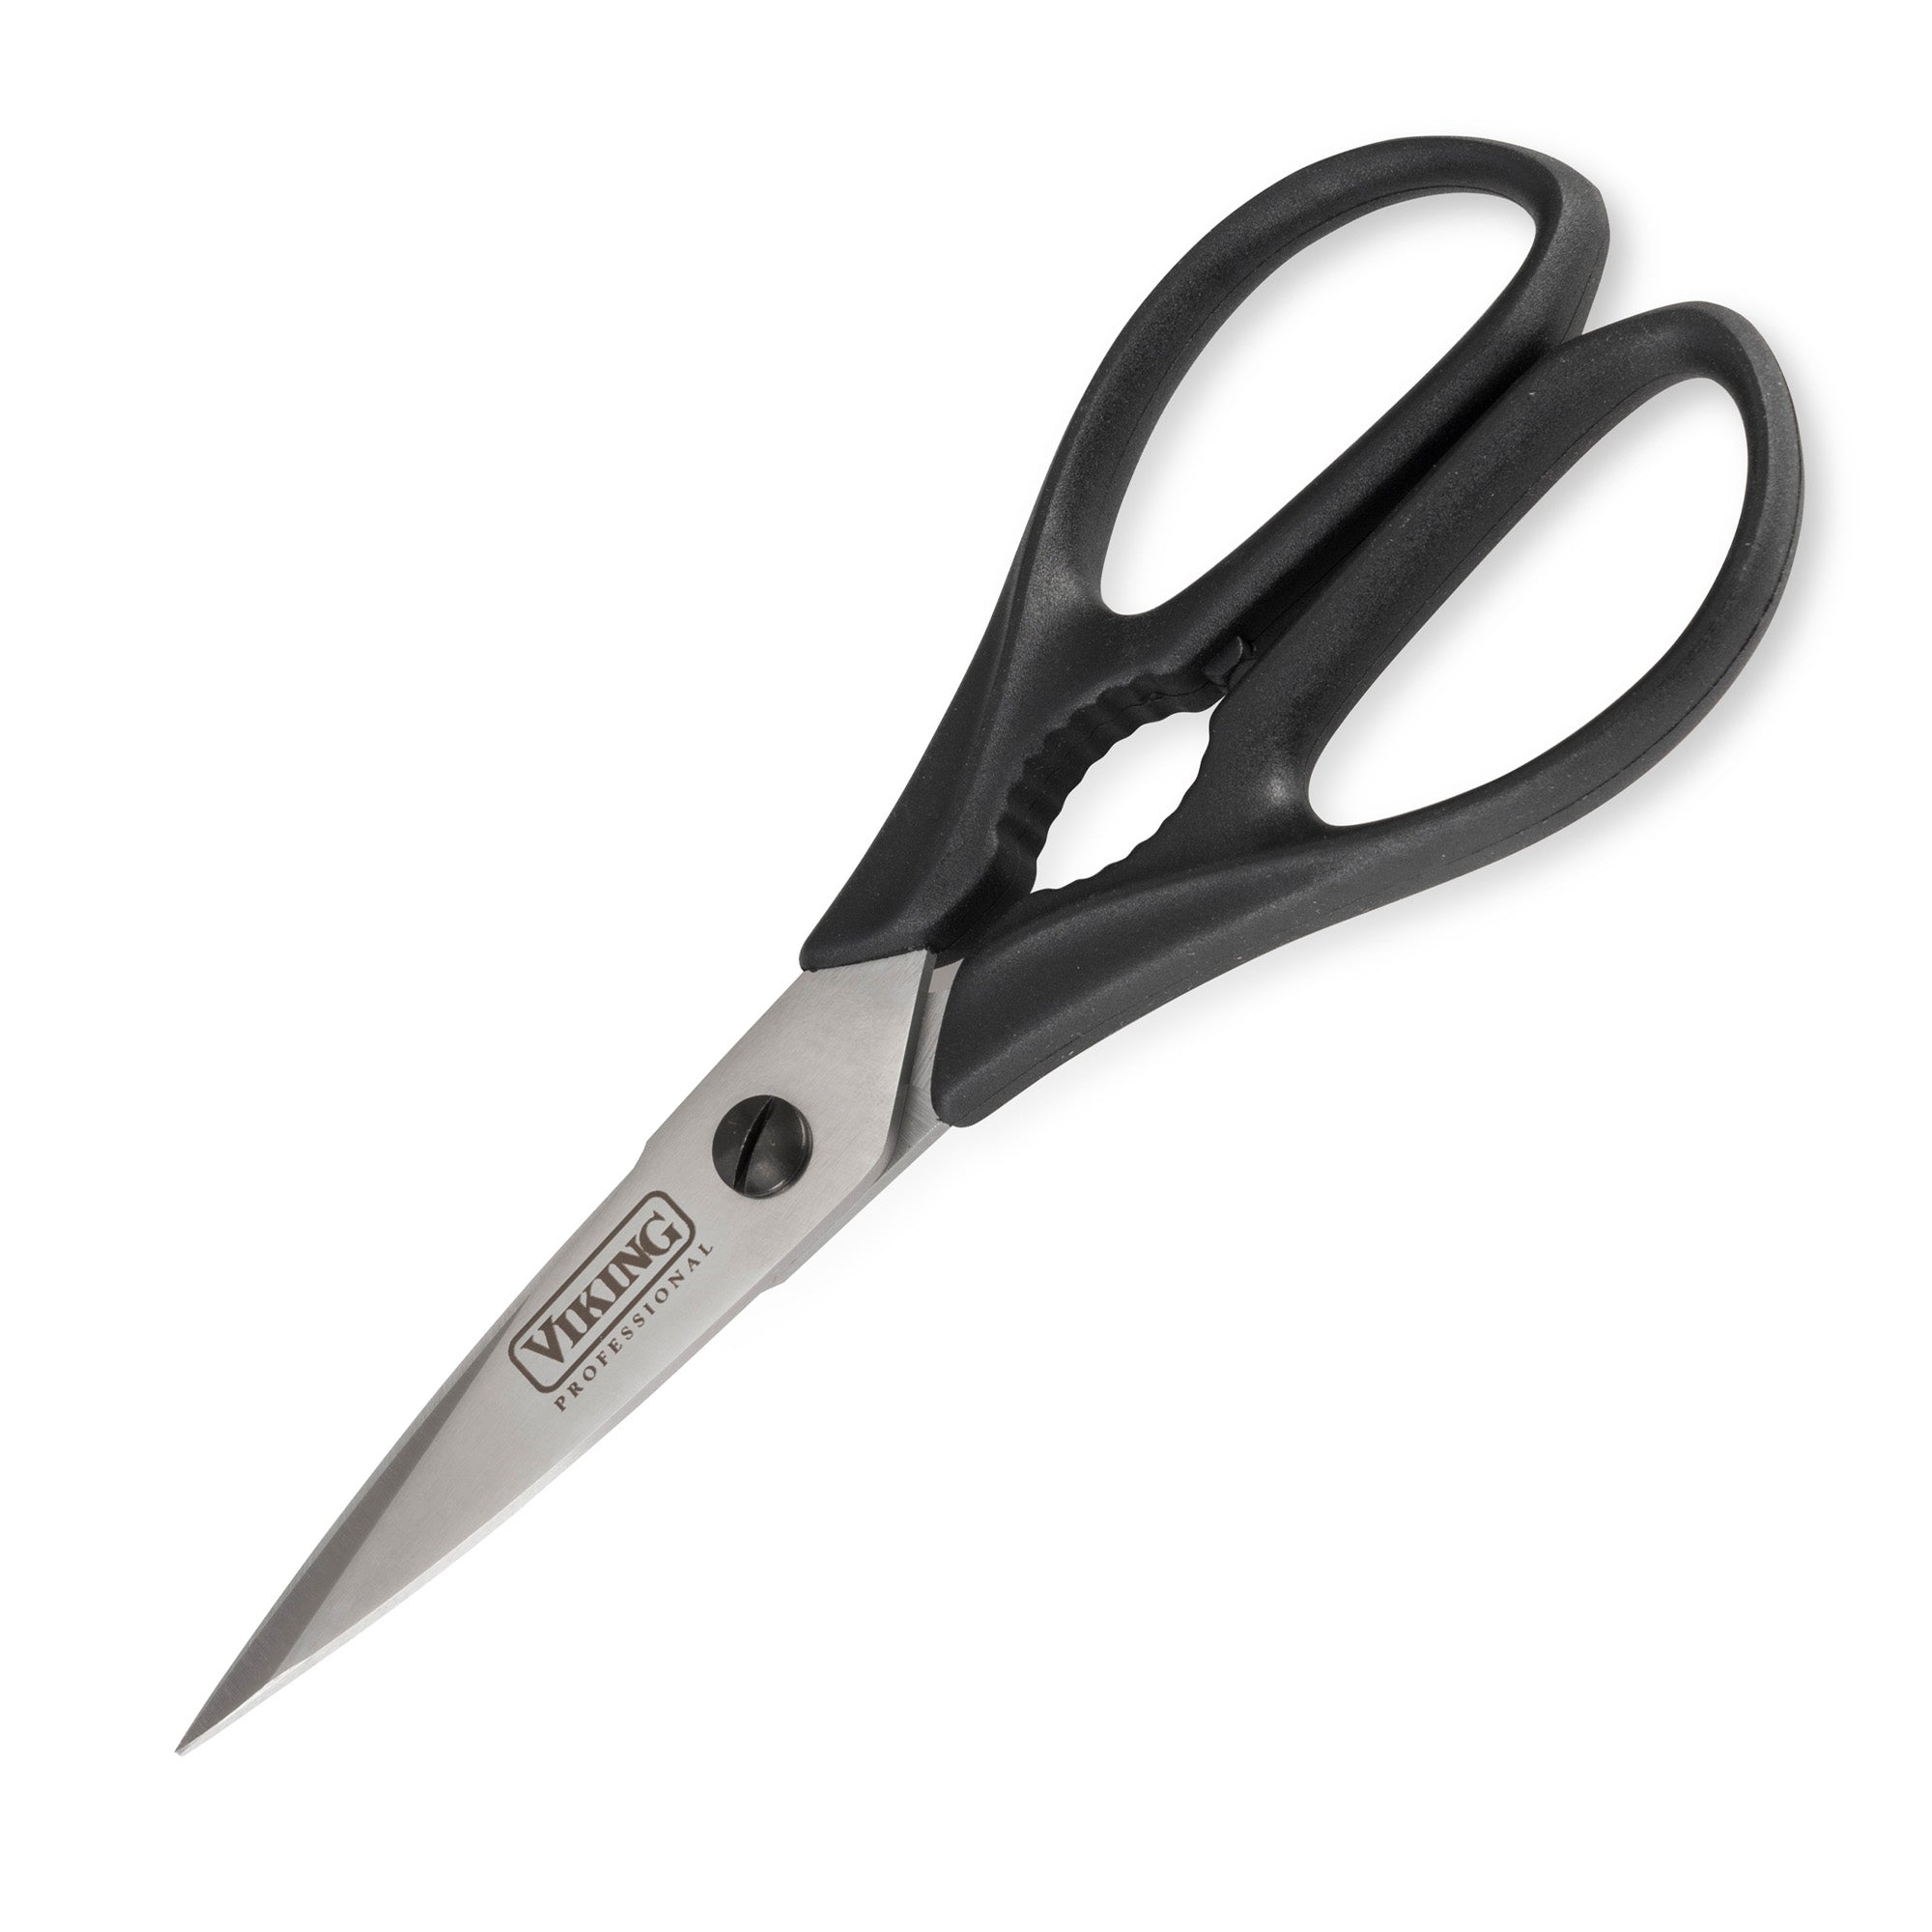 Belmont 8 inch Utility Scissors Shears / Straight Trimmers #576/8 - Italy